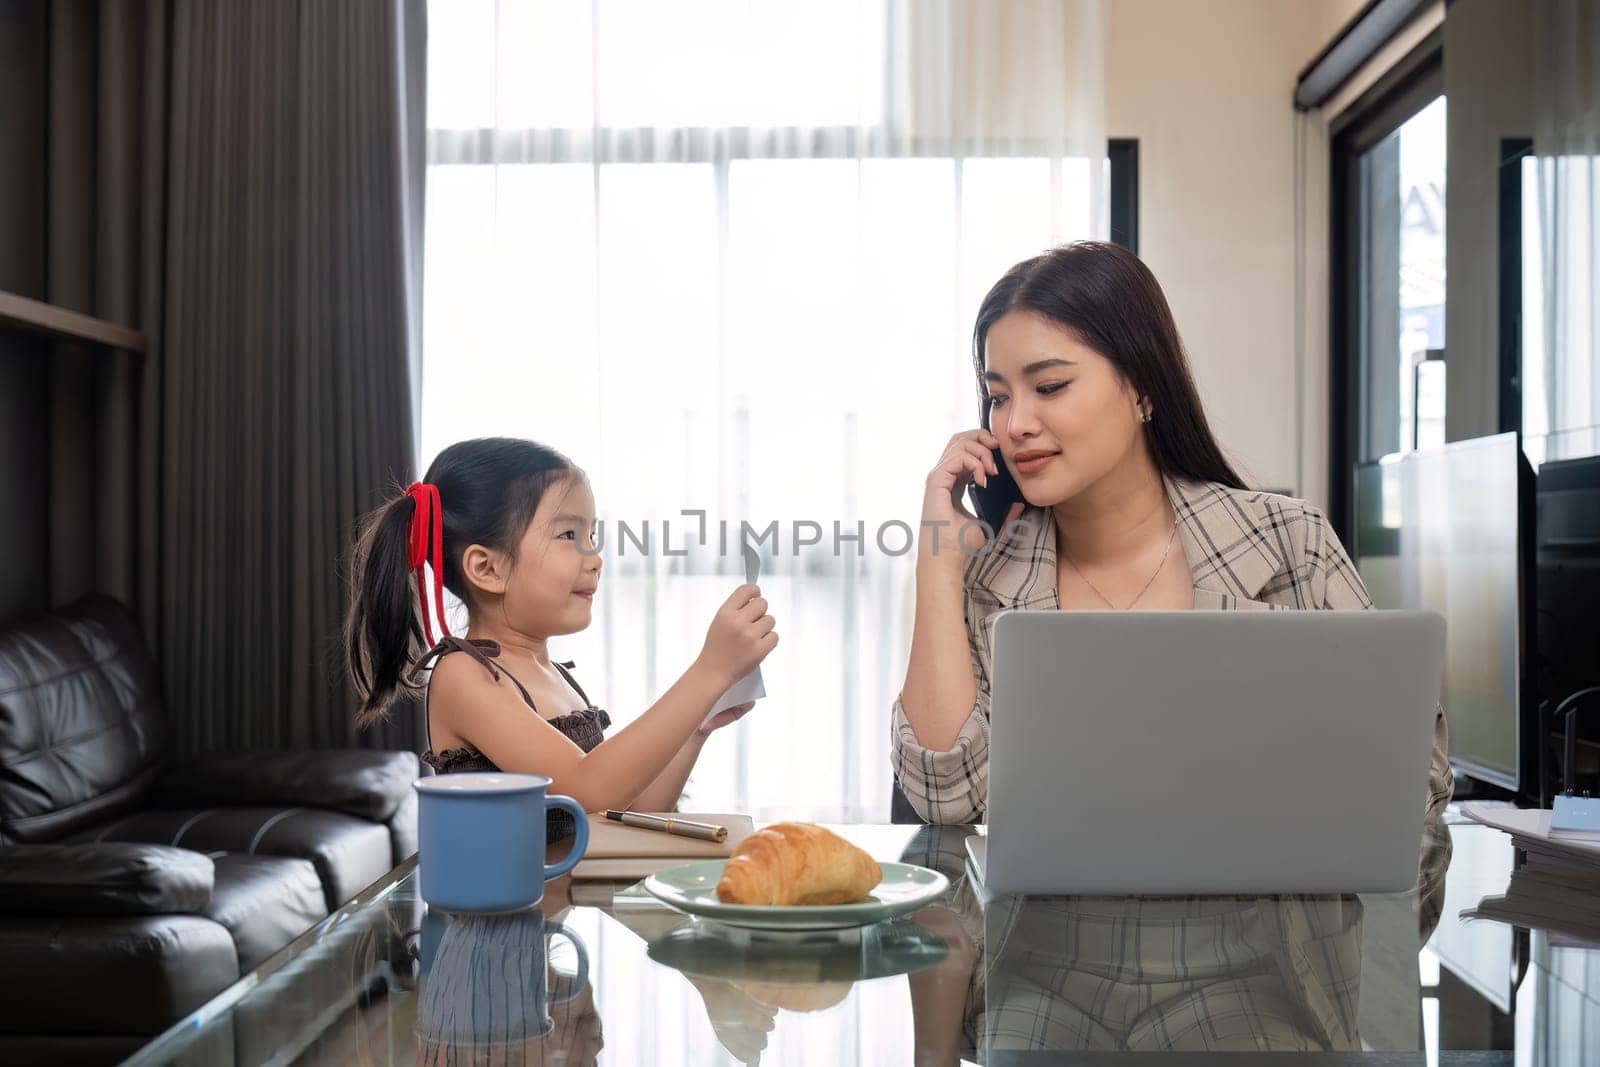 The young woman works from home, raises her daughter, and discusses work with co-workers on the phone and online..